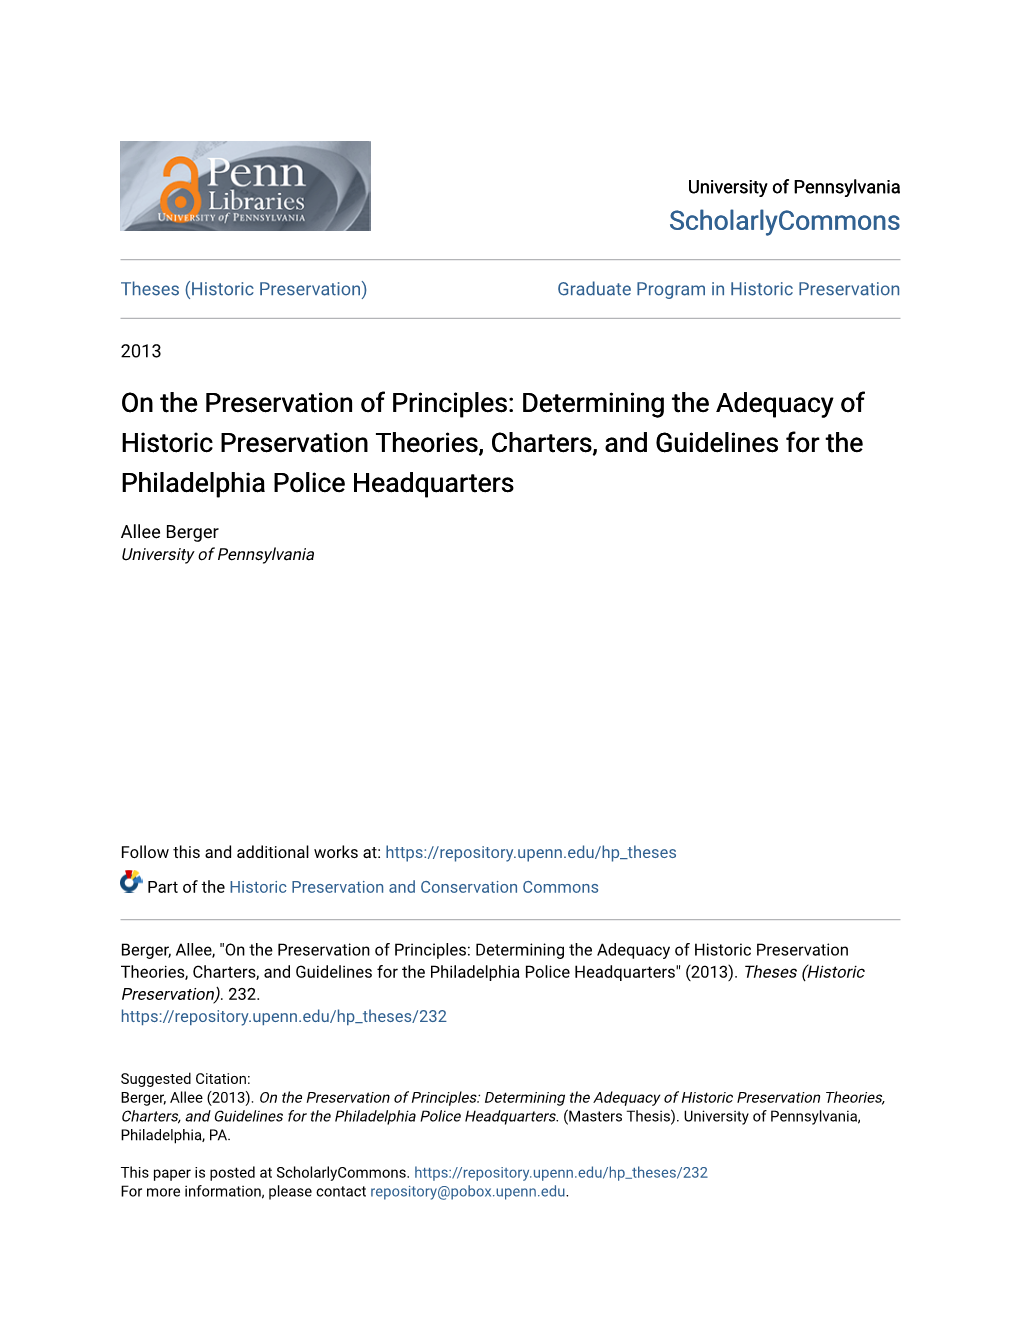 Determining the Adequacy of Historic Preservation Theories, Charters, and Guidelines for the Philadelphia Police Headquarters